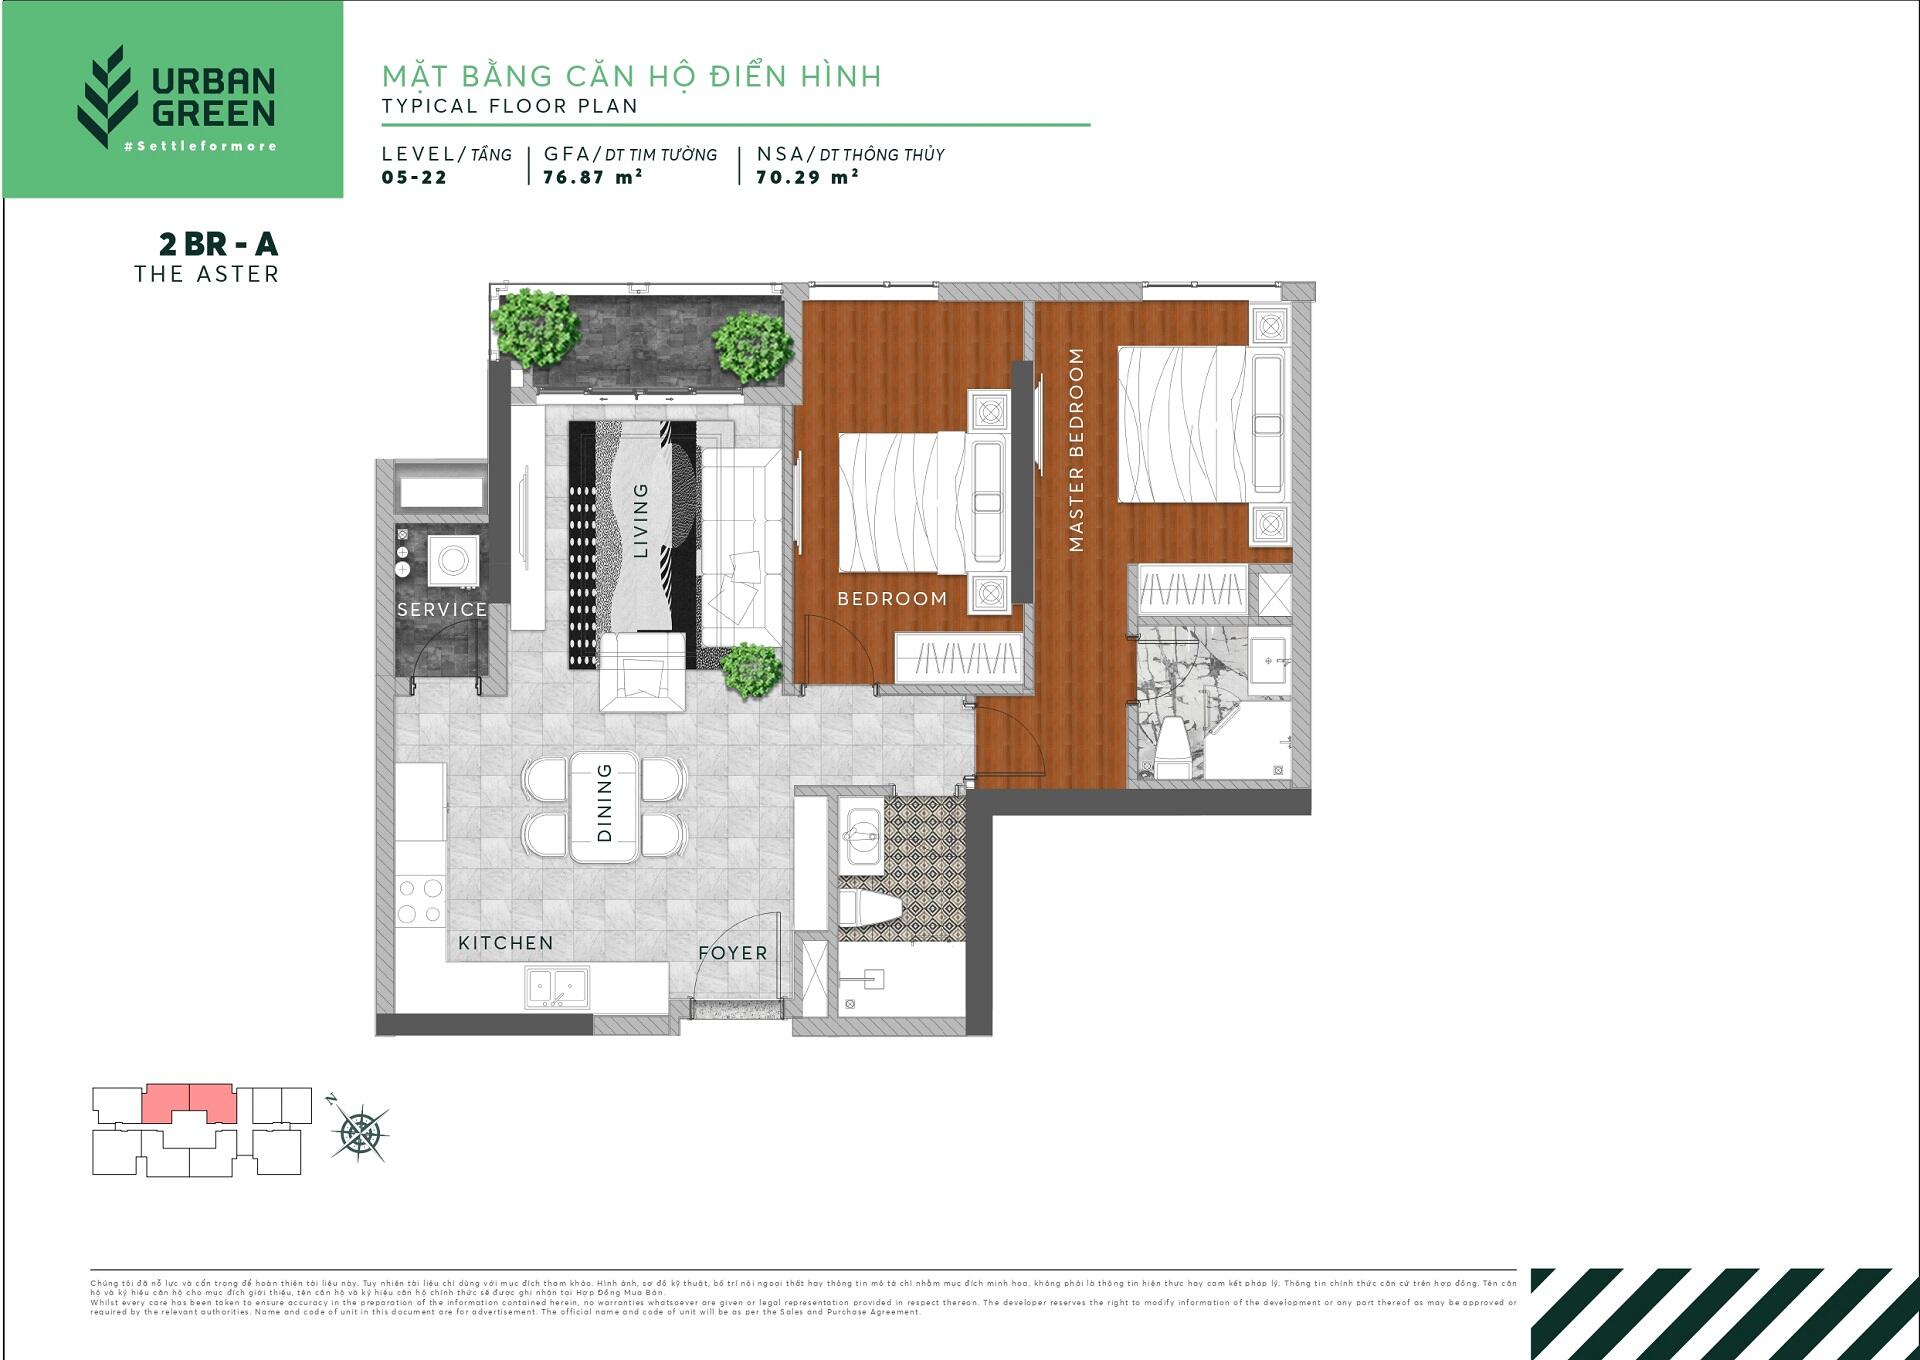 Floor plan of The Aster apartment 2 bedrooms 2BR - A